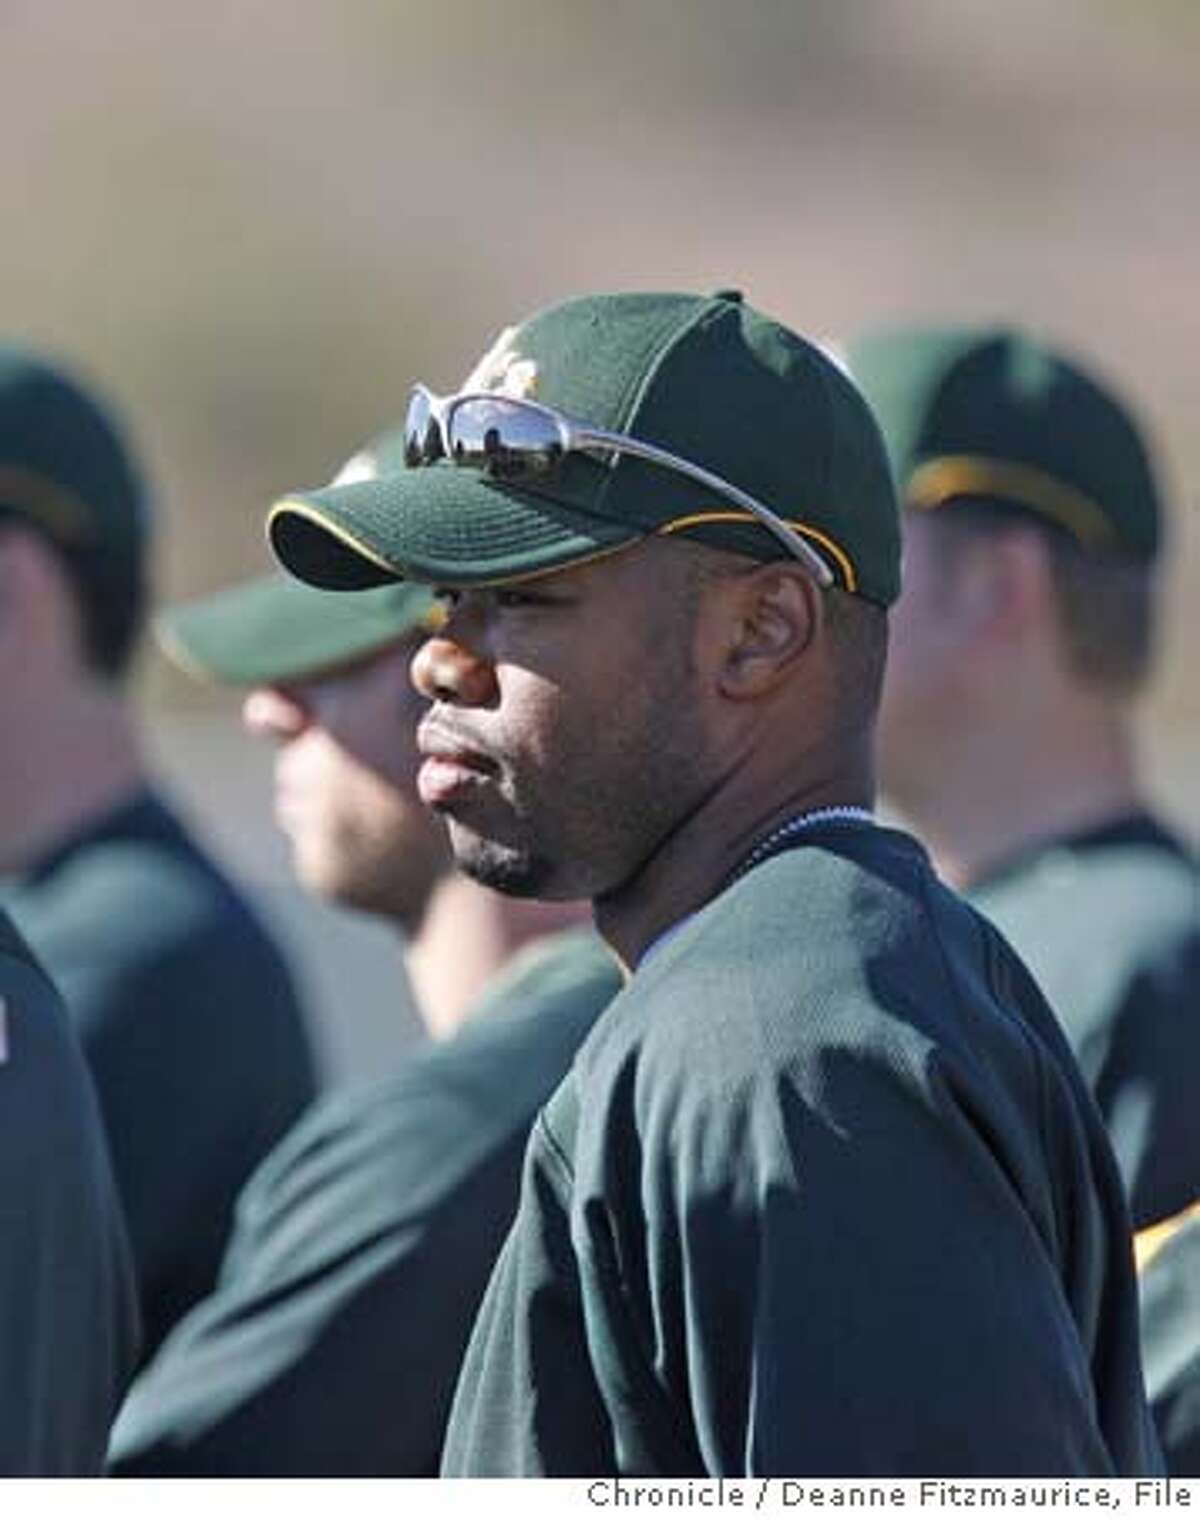 athletics_053_df.jpg Shannon Stewart is a new player for the Oakland Athletics. Oakland Athletics work out during spring training at Papago Park. Photographed in Phoenix on 2/22/07. Chronicle Photo / Deanne Fitzmaurice Mandatory credit for photographer and San Francisco Chronicle. No Sales/Magazines out.